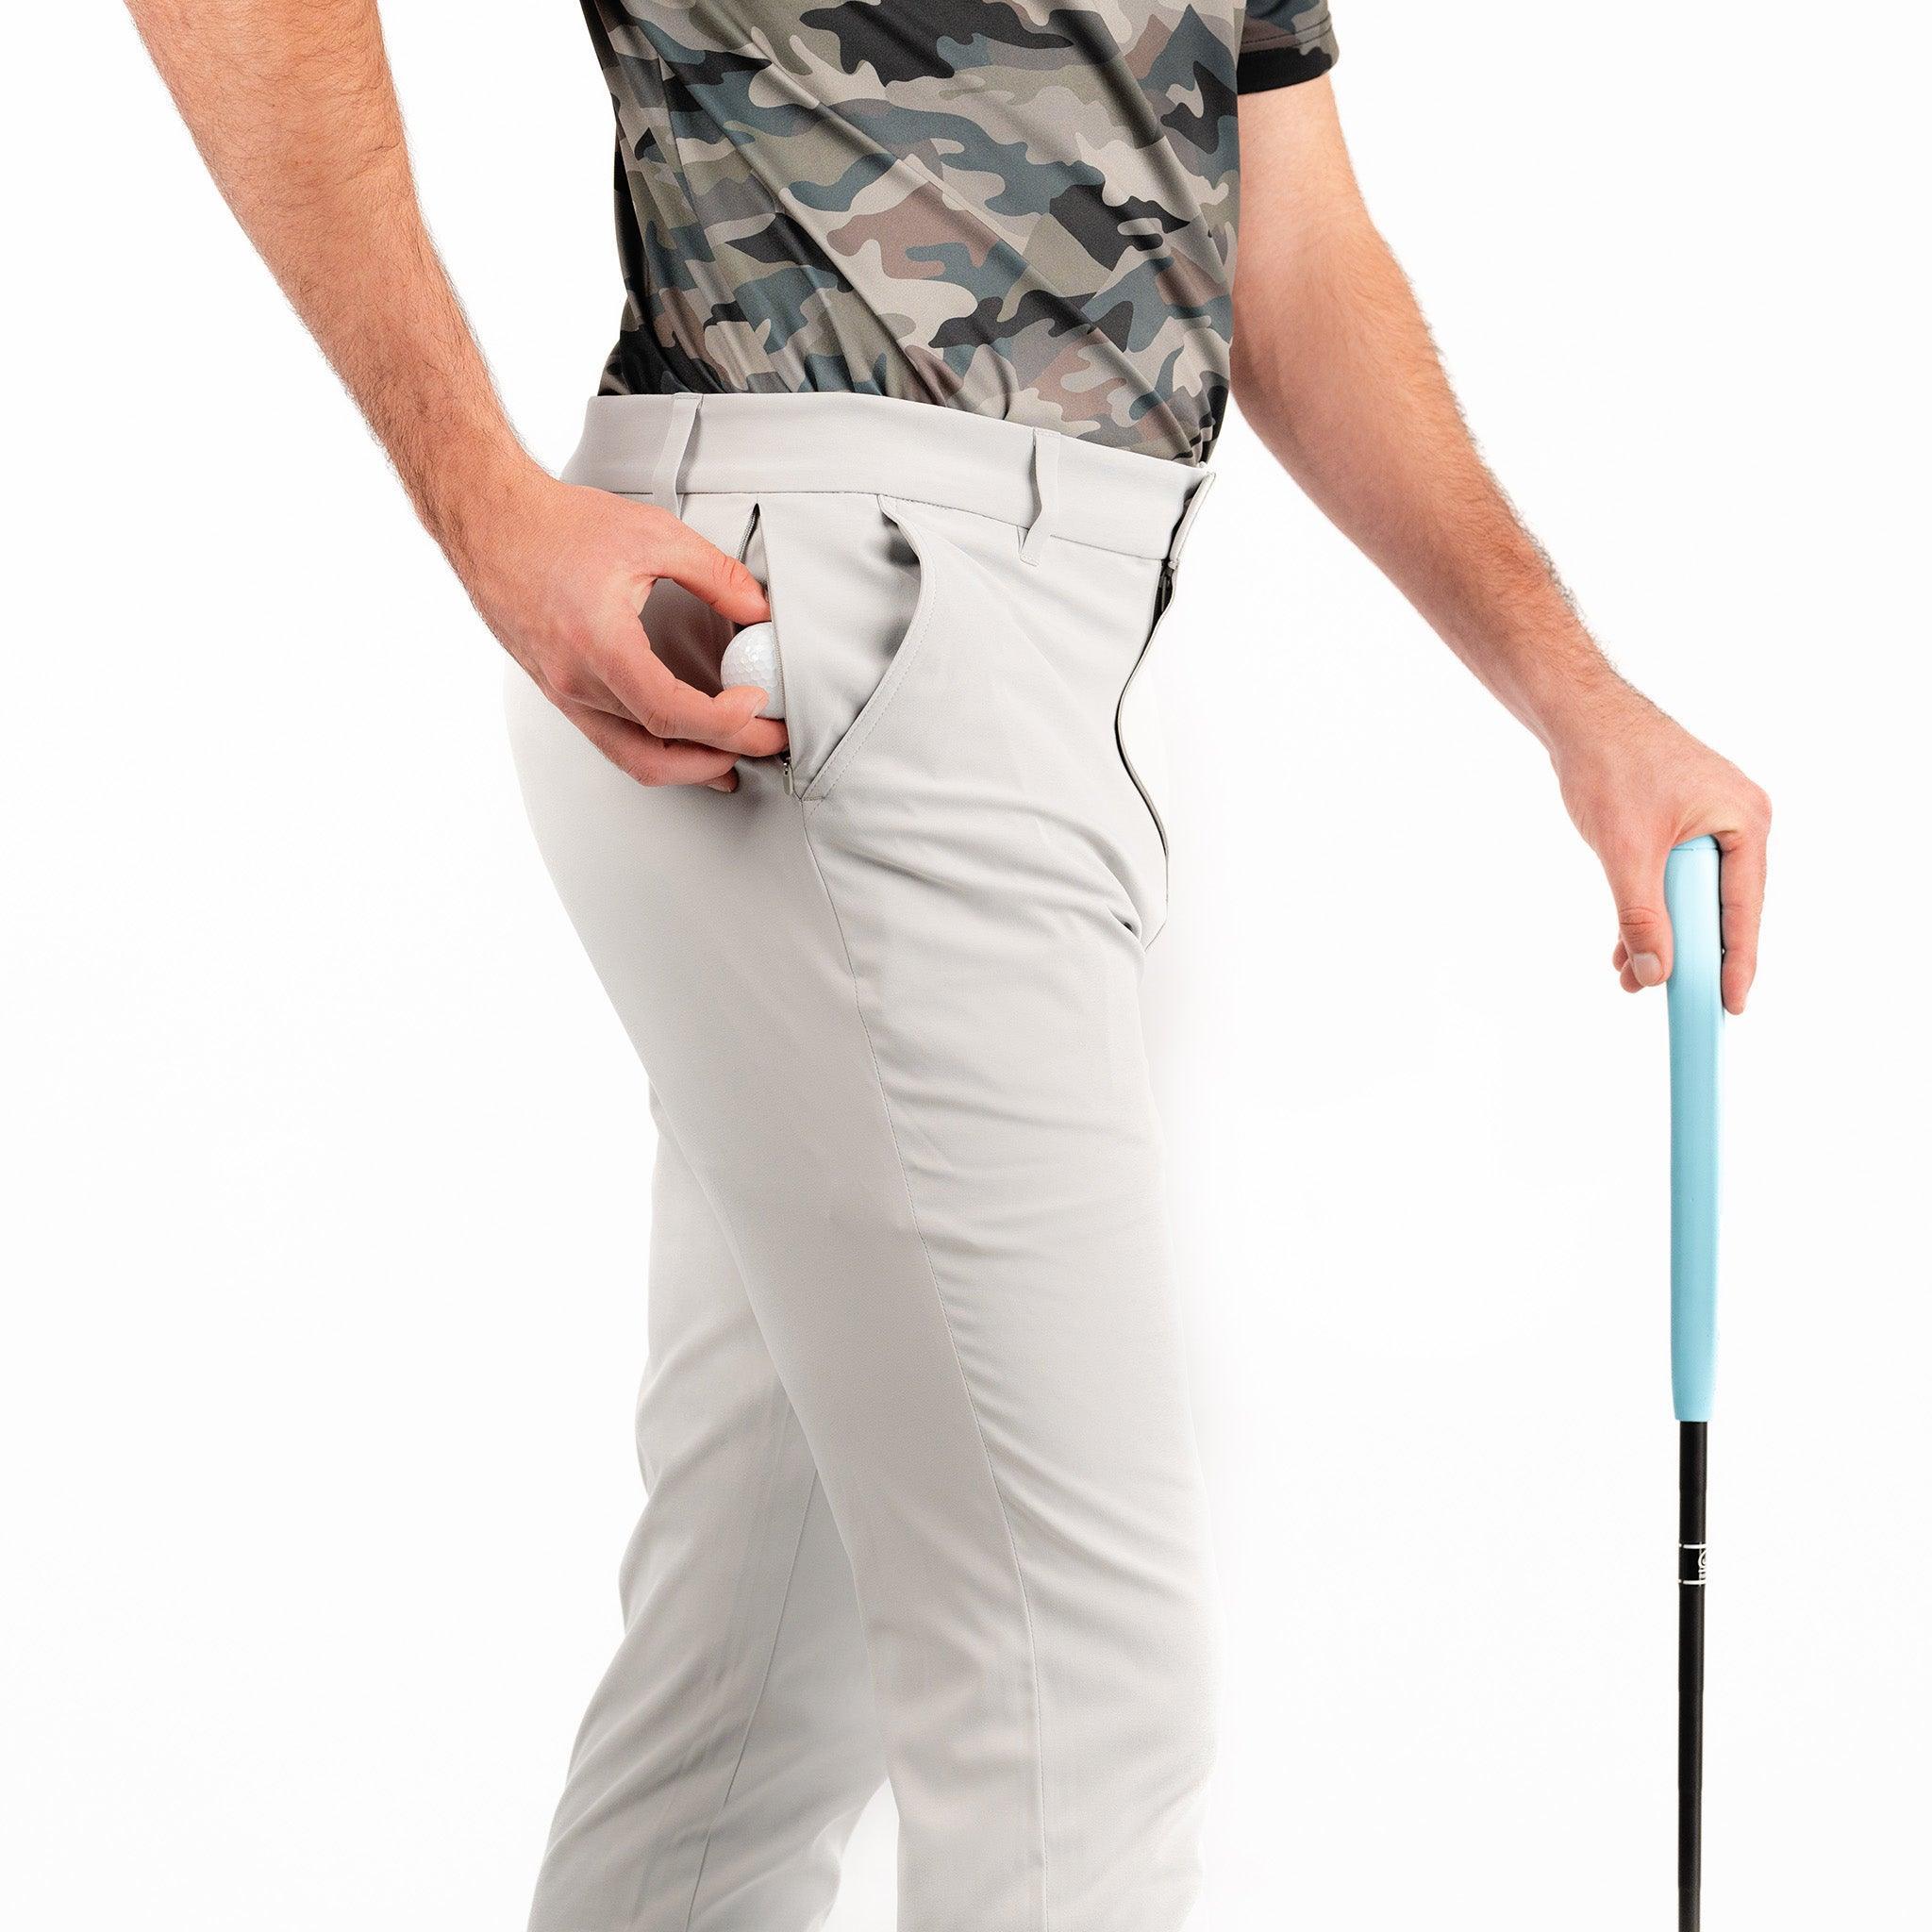 Golf Pants  Buy Golf Pants with free shipping on aliexpress